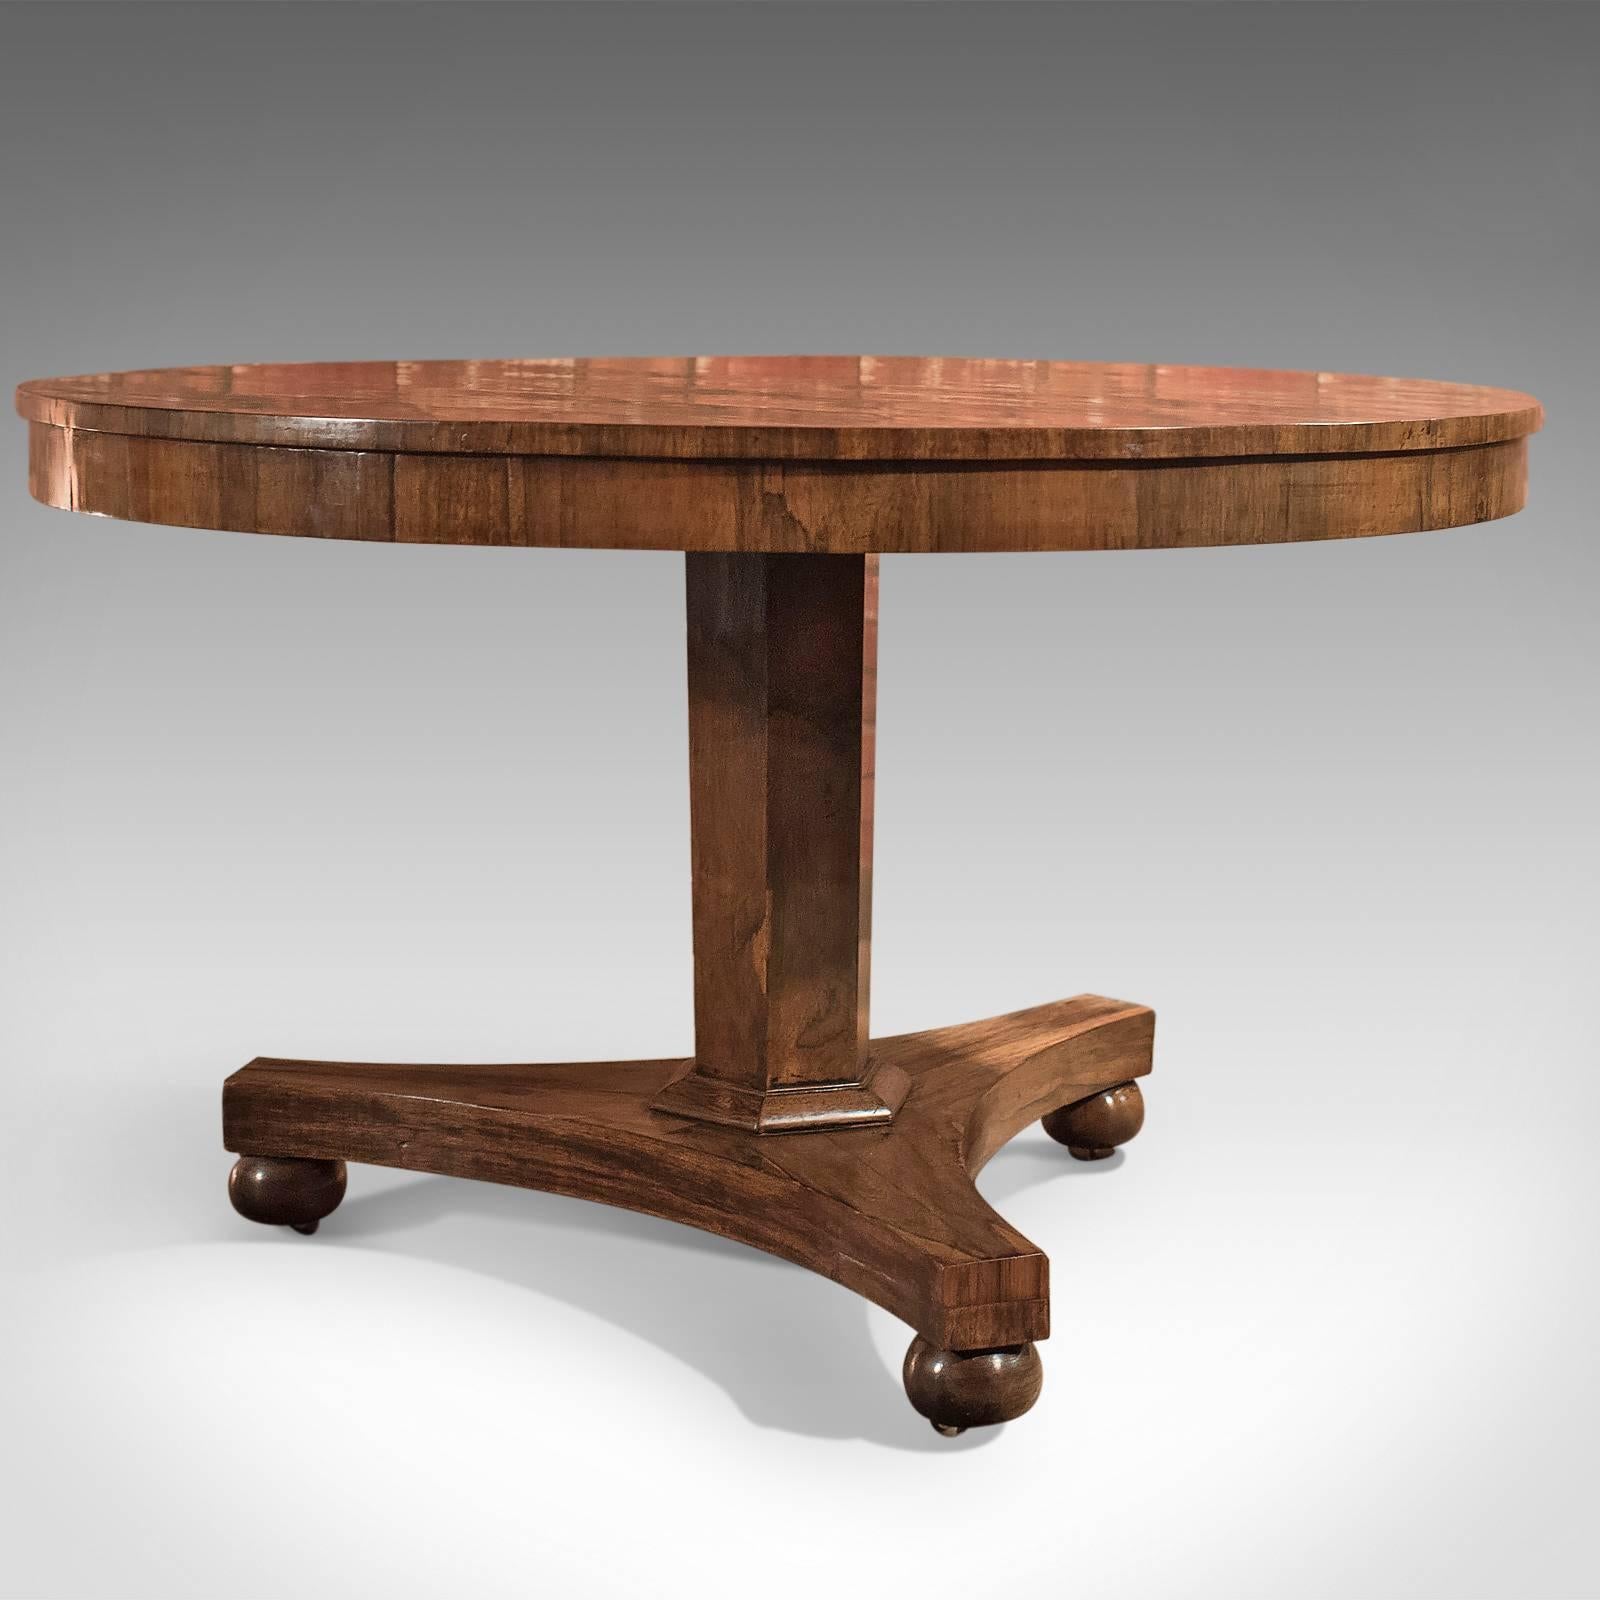 This is a Regency antique breakfast table dating to circa 1820 of good proportion. 

Fabulous grain detail in the bookmatched rosewood top
Desirable aged patina with honest wear consistent with age
Crossbanded rosewood apron

Raised on